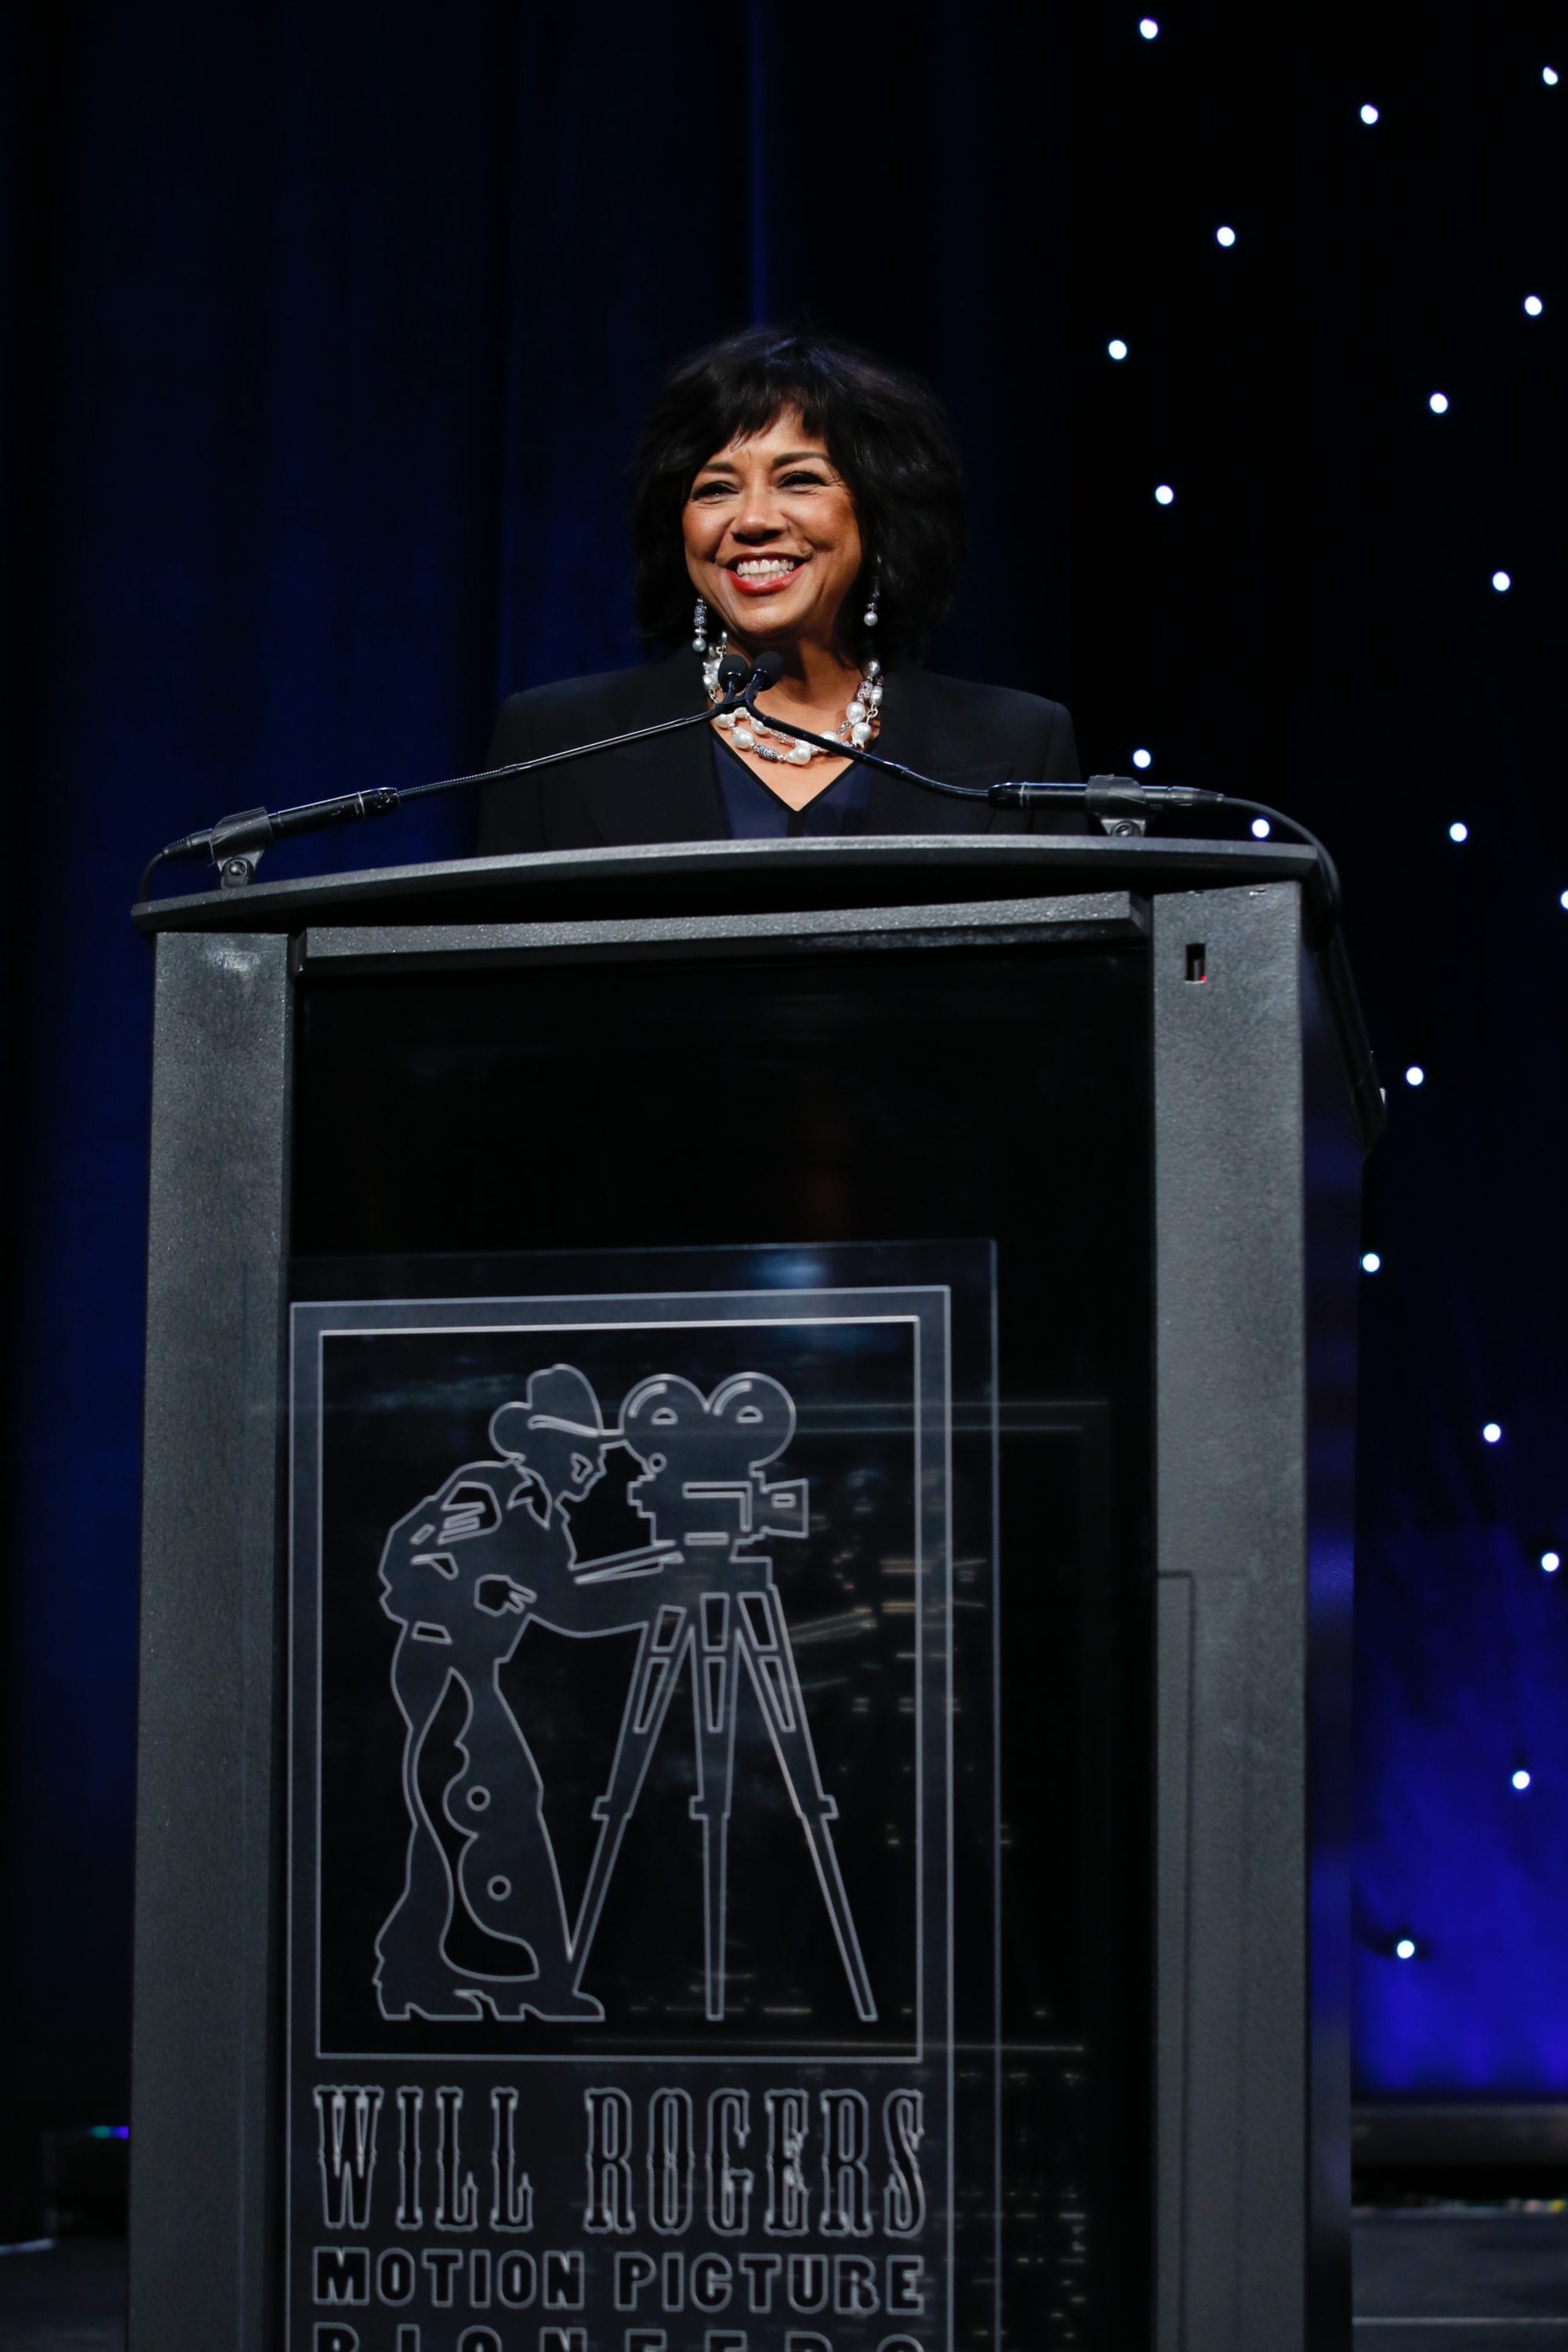 Pioneer of the Year Dinner honoring Cheryl Boone Isaacs  at CinemaCon 2017